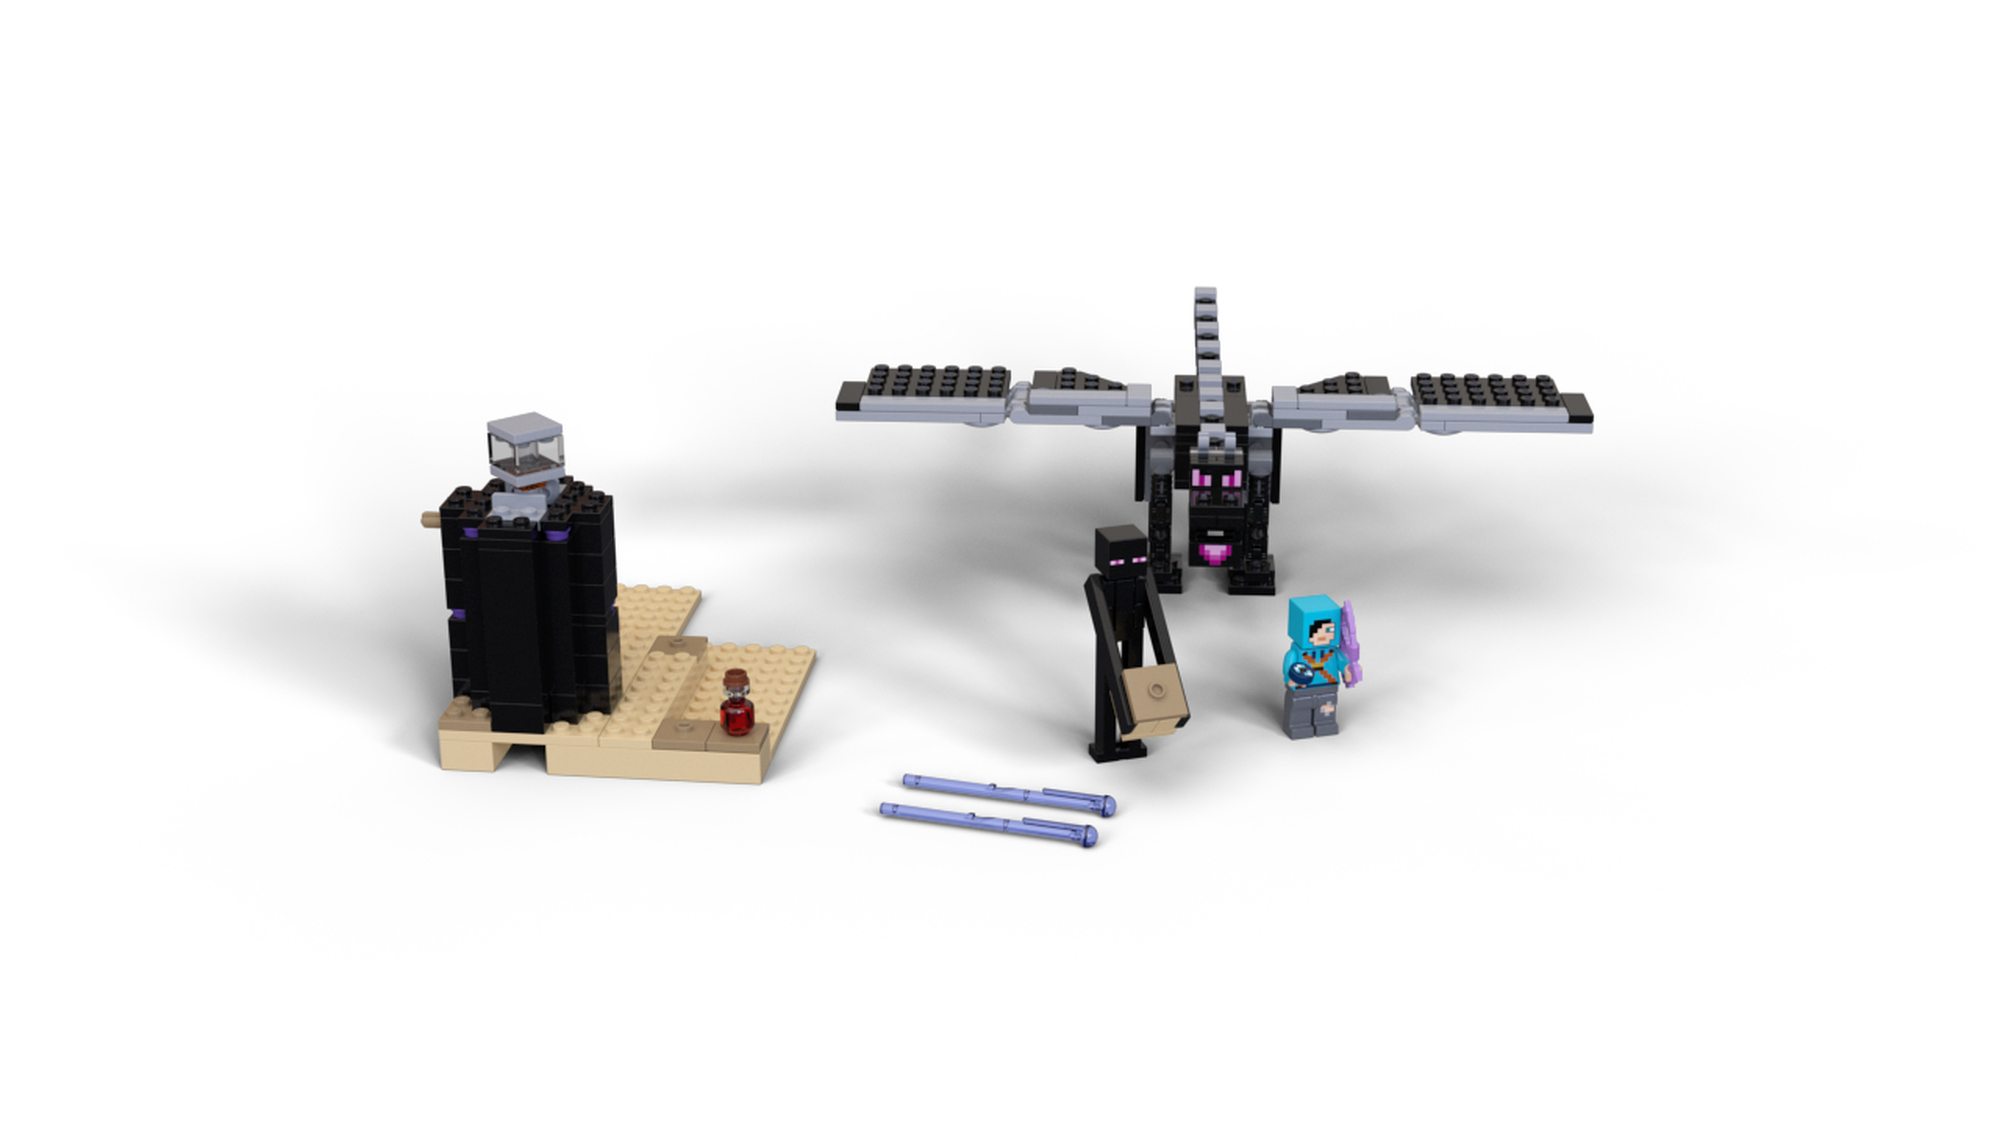 LEGO Minecraft 21151 The End Battle review